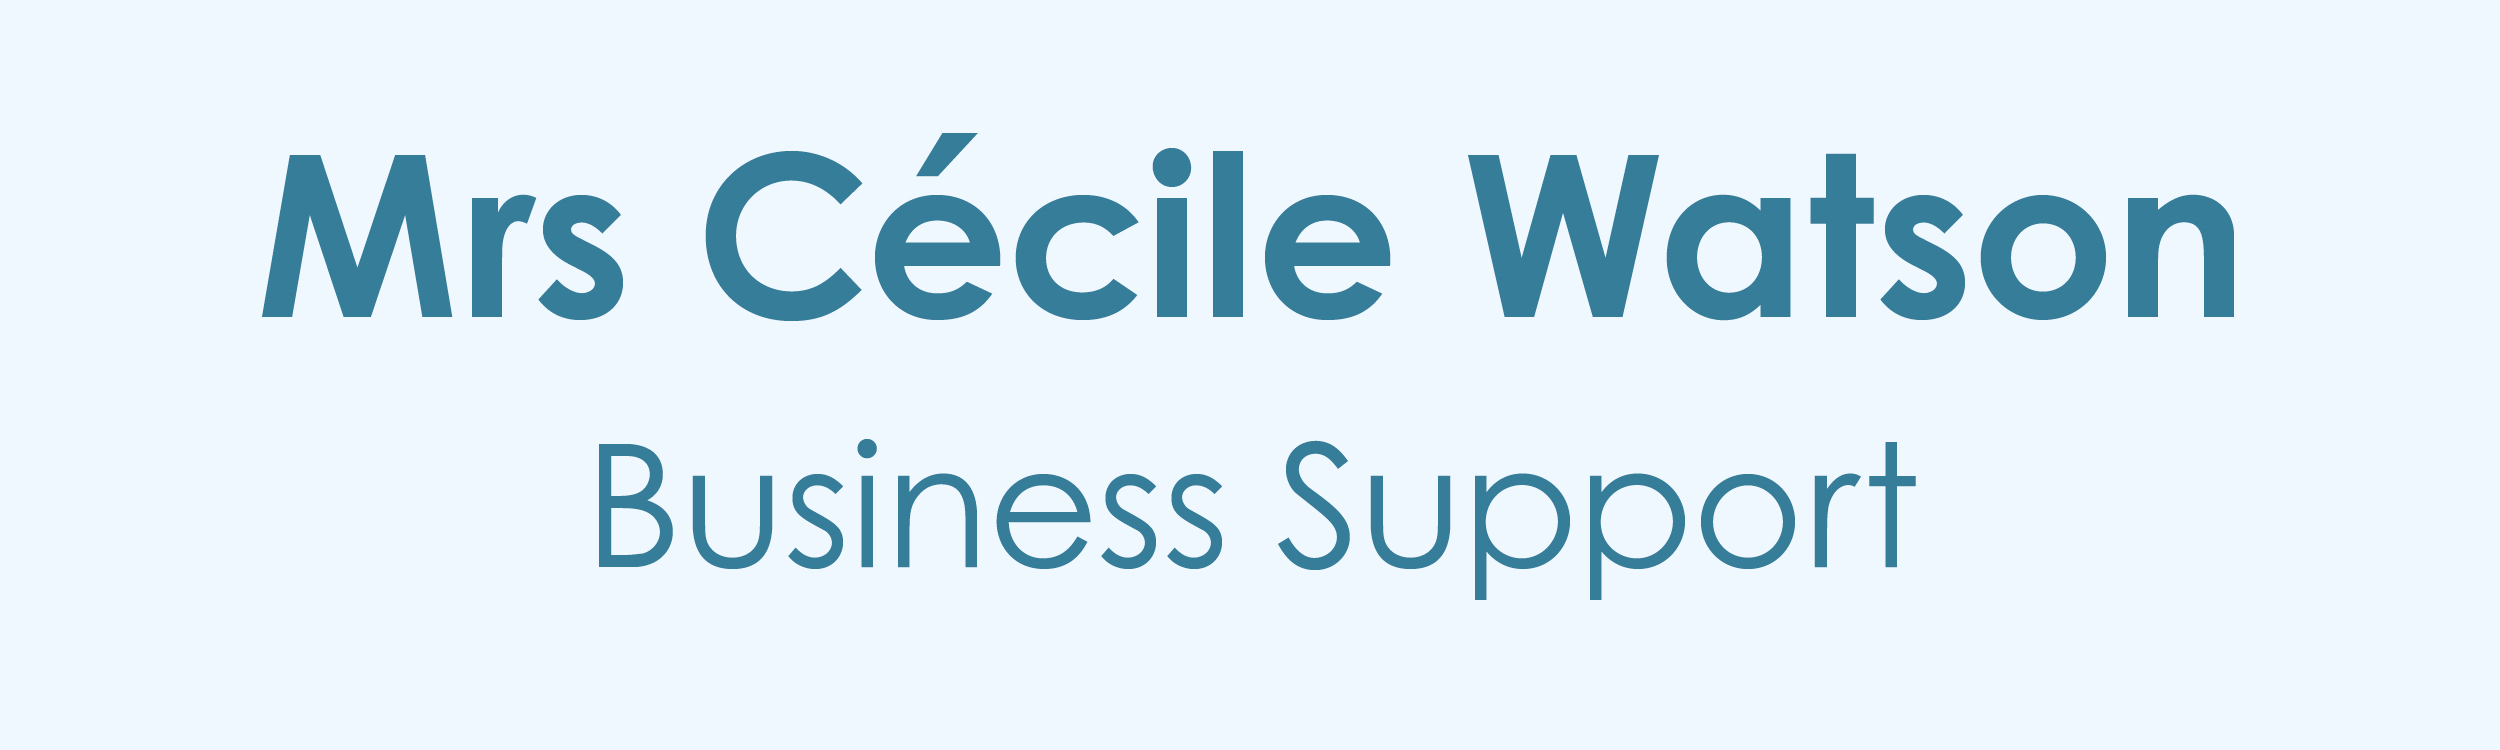 A title plaque for the picture of Mrs Cécile Watson, Business Support